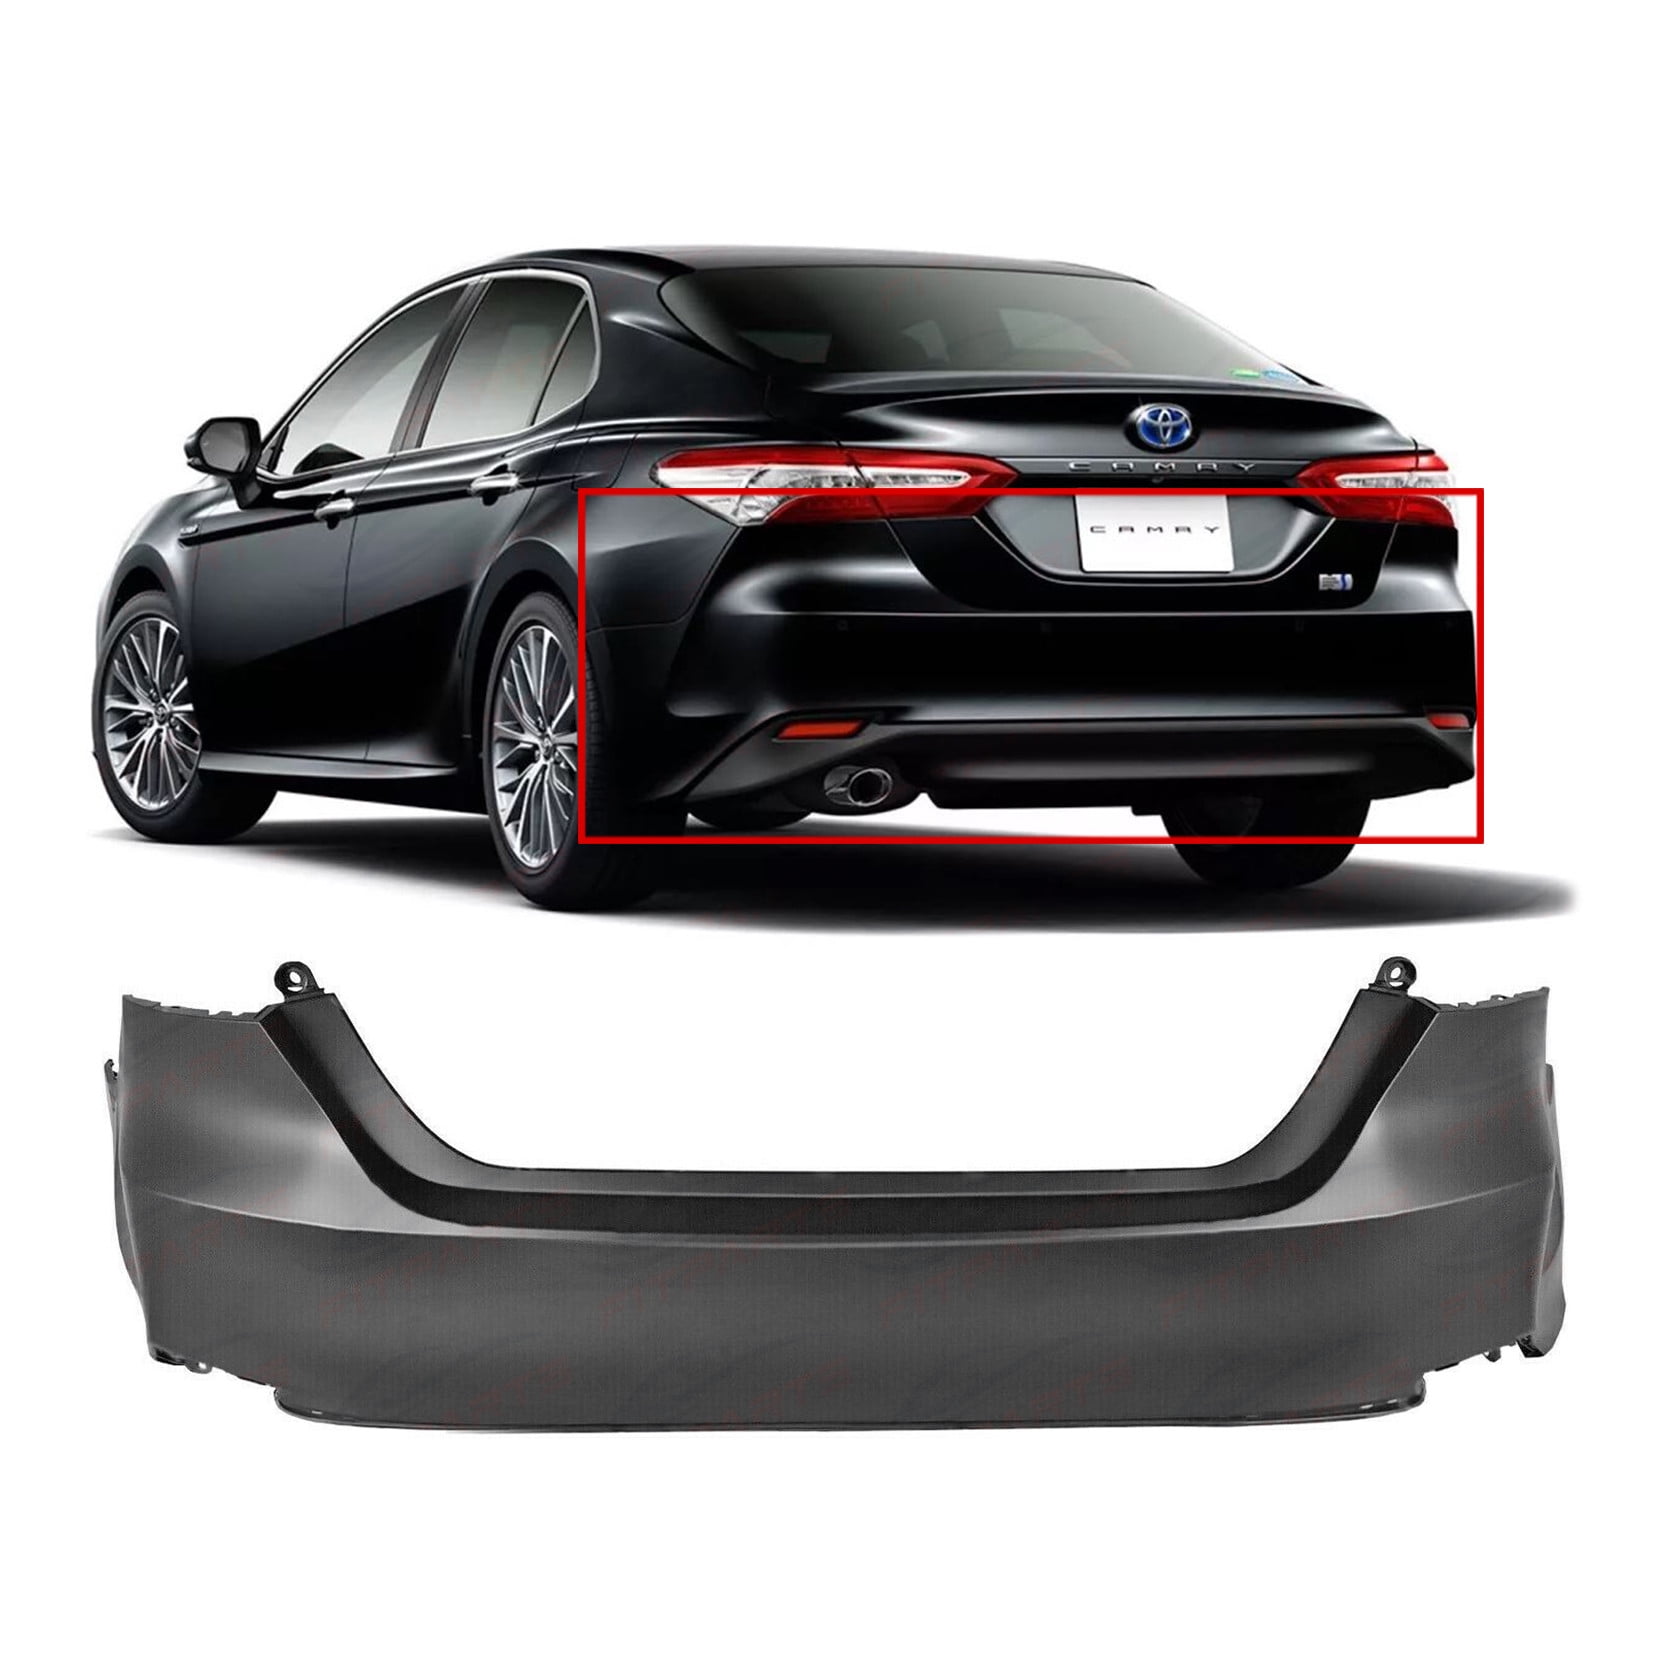 Toyota Camry Bumper Replacement Cost dReferenz Blog